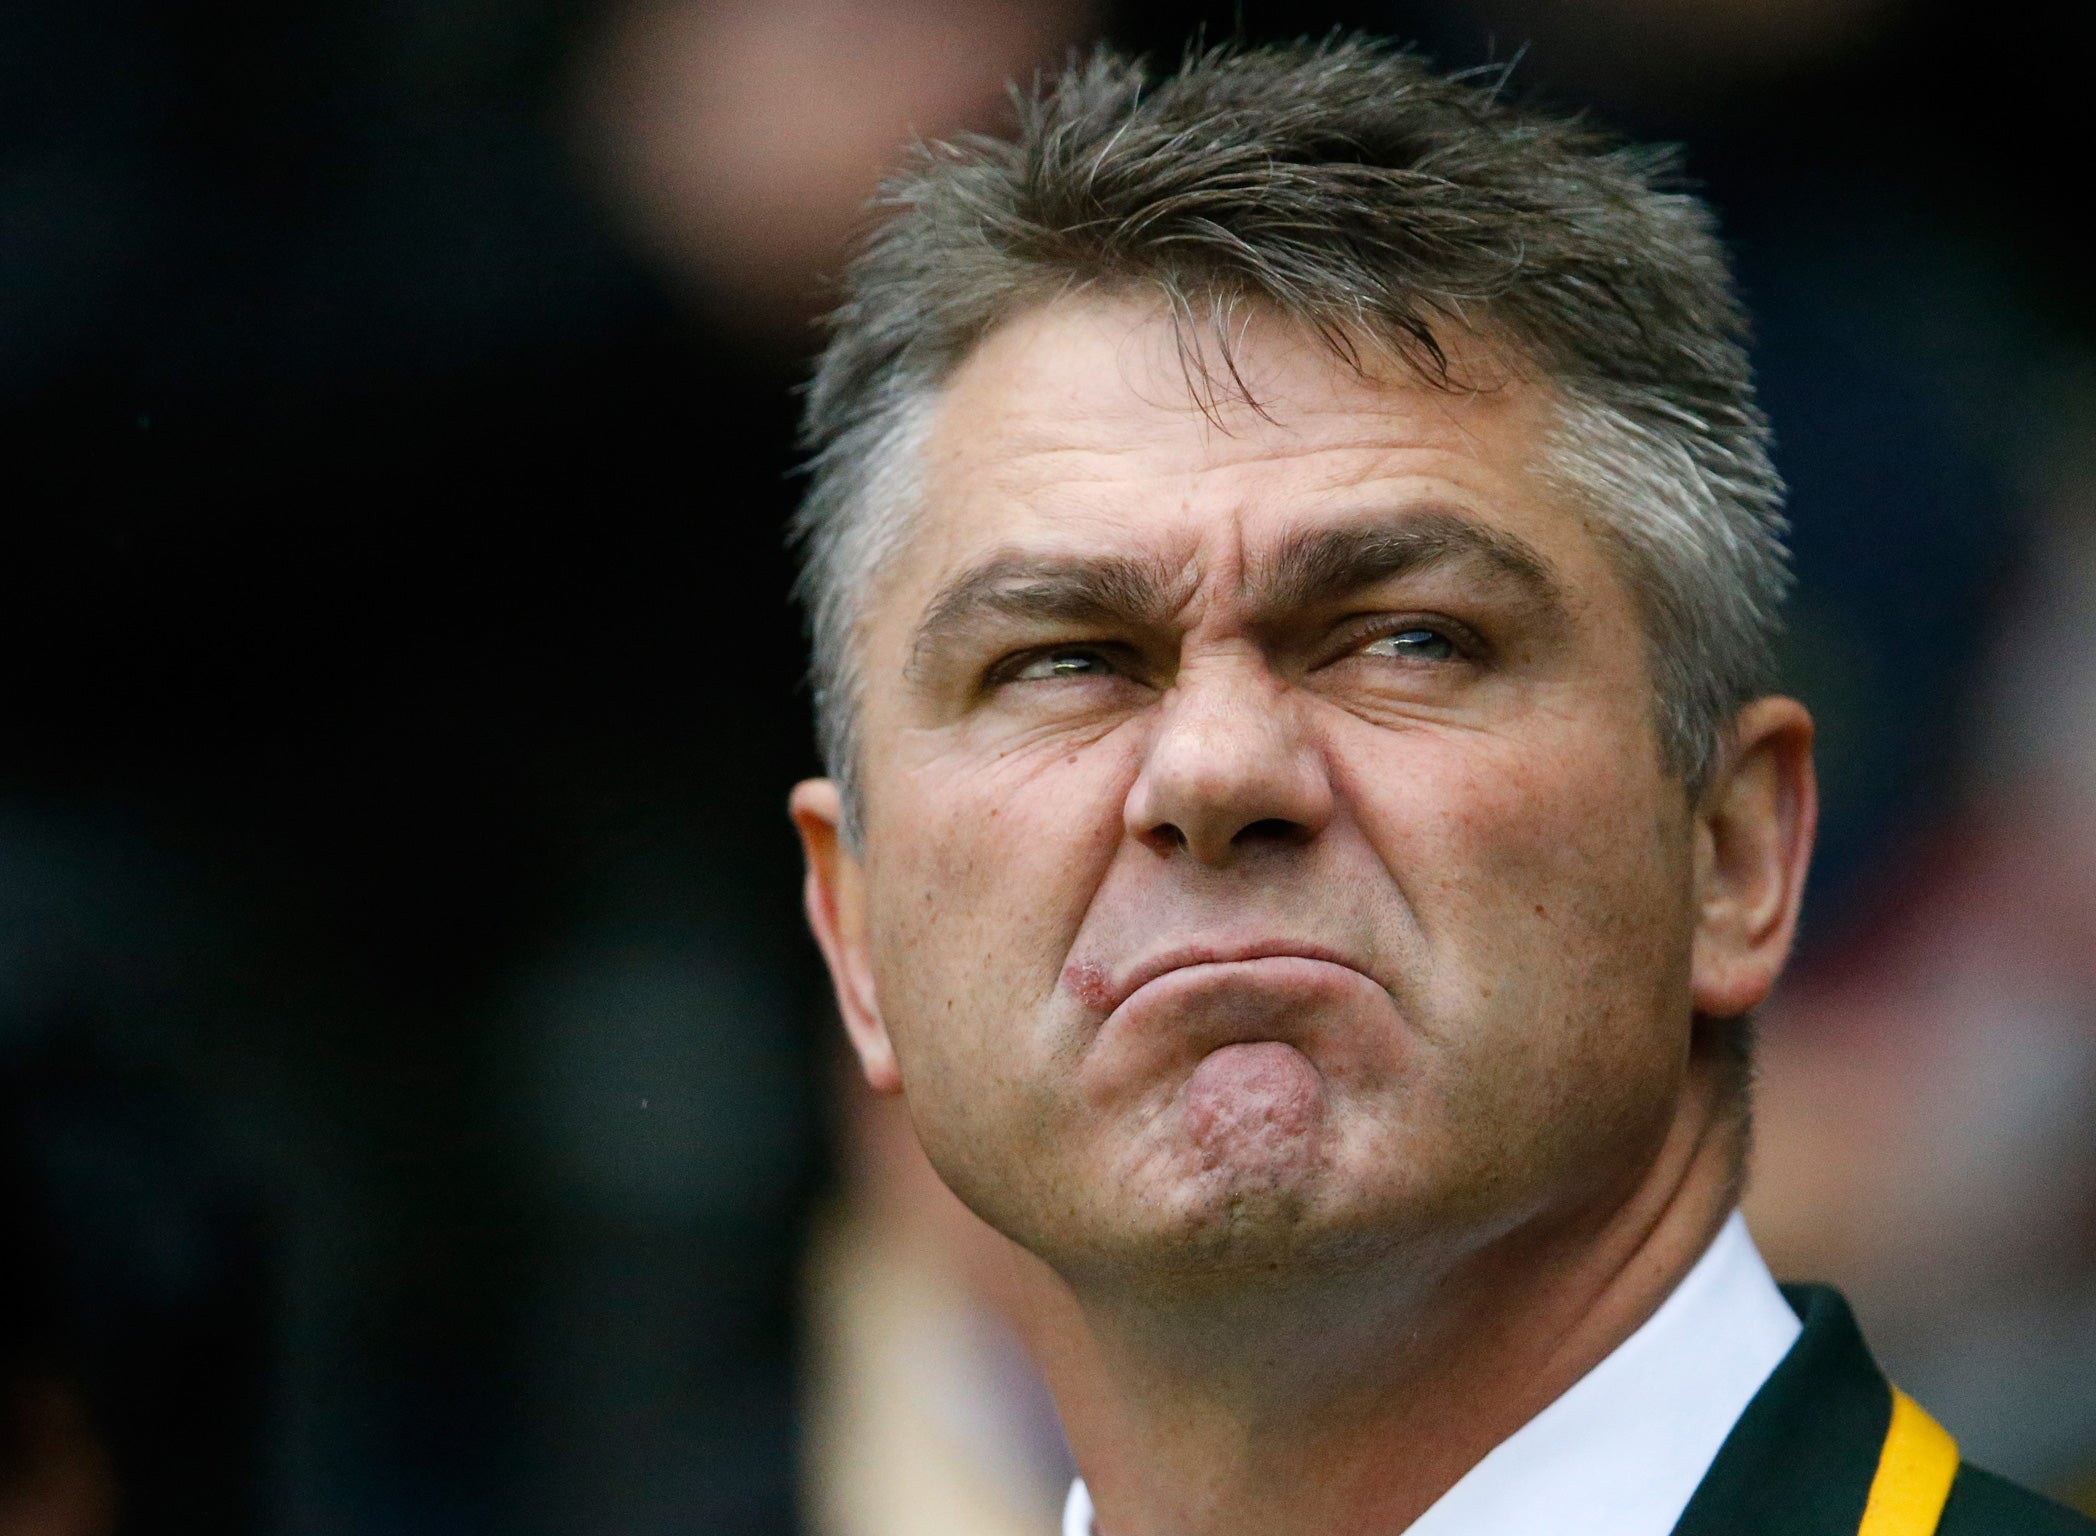 Face time: The South Africa coach Heyneke Meyer looks unimpressed